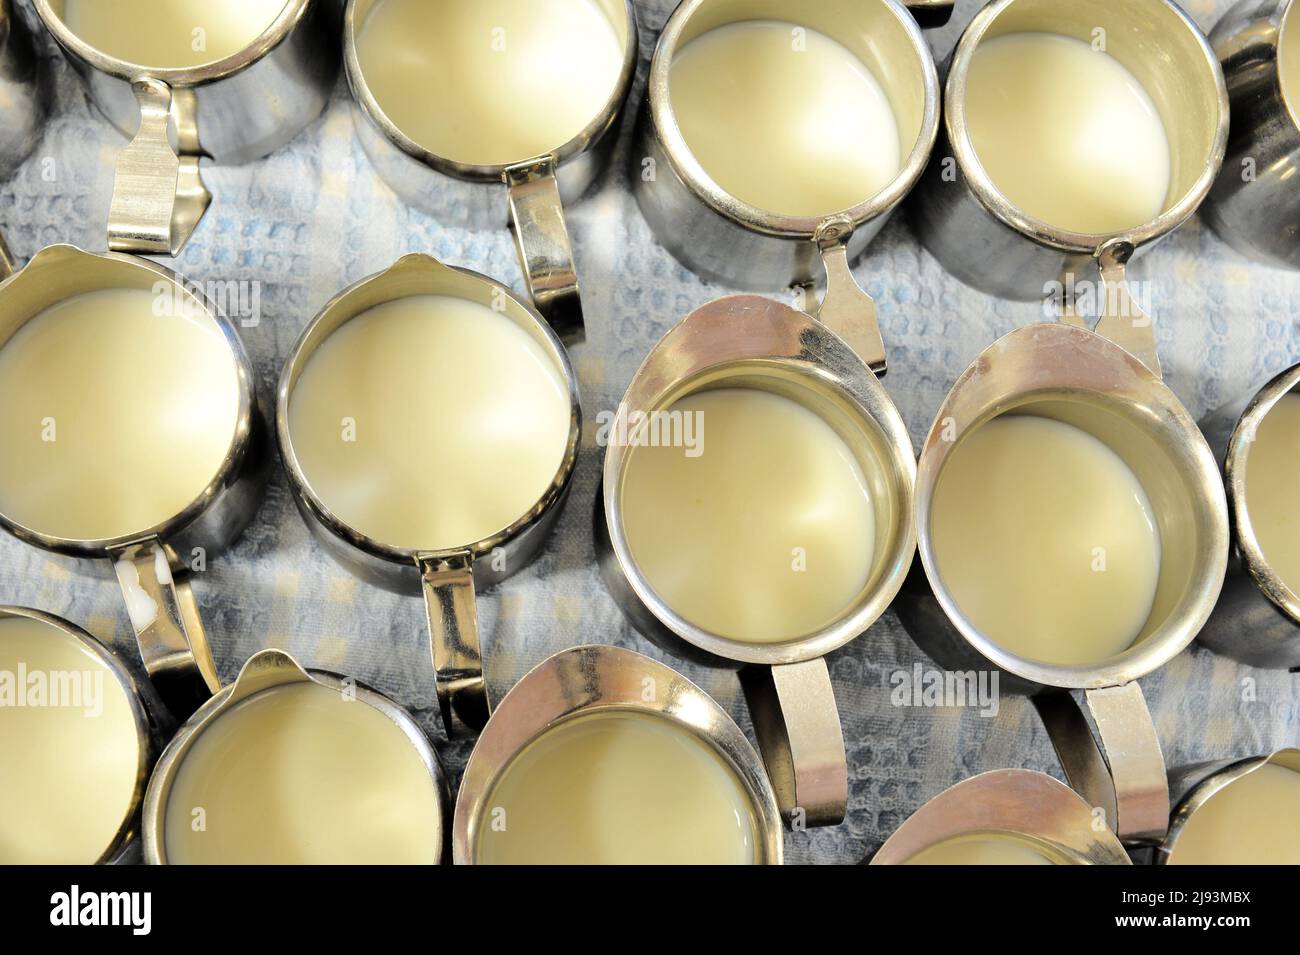 A grouping of small metal hospital bedside milk jugs, all containing milk. Stock Photo